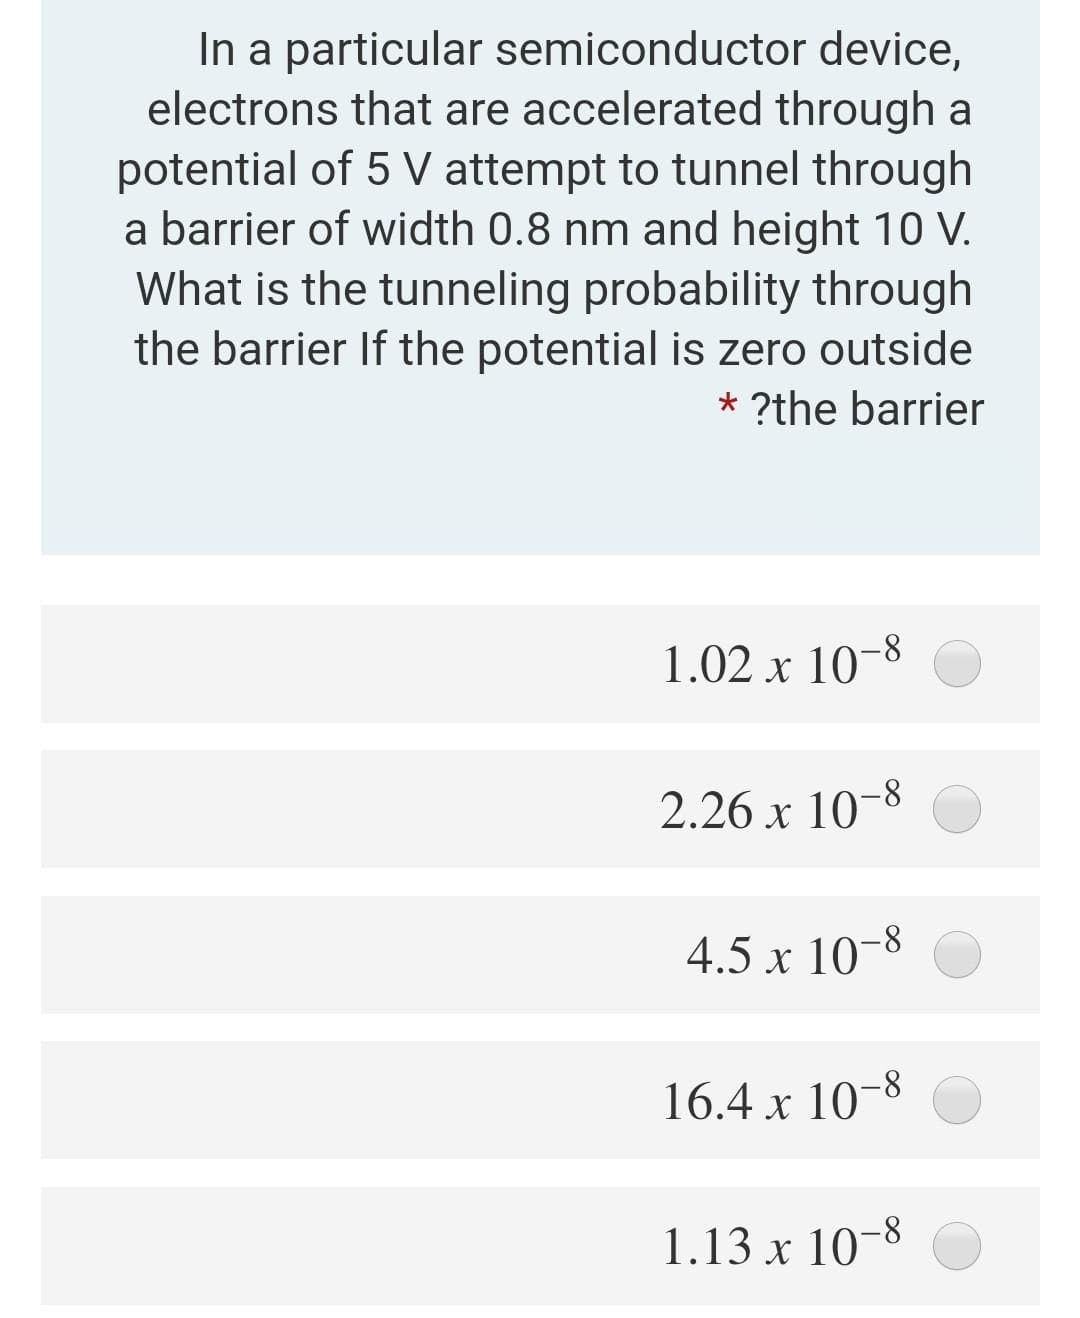 In a particular semiconductor device,
electrons that are accelerated through a
potential of 5 V attempt to tunnel through
a barrier of width 0.8 nm and height 10 V.
What is the tunneling probability through
the barrier If the potential is zero outside
* ?the barrier
1.02 x 10-8
2.26 x 10-8
4.5 x 10-8
16.4 x 10-8
1.13 x 10-8
